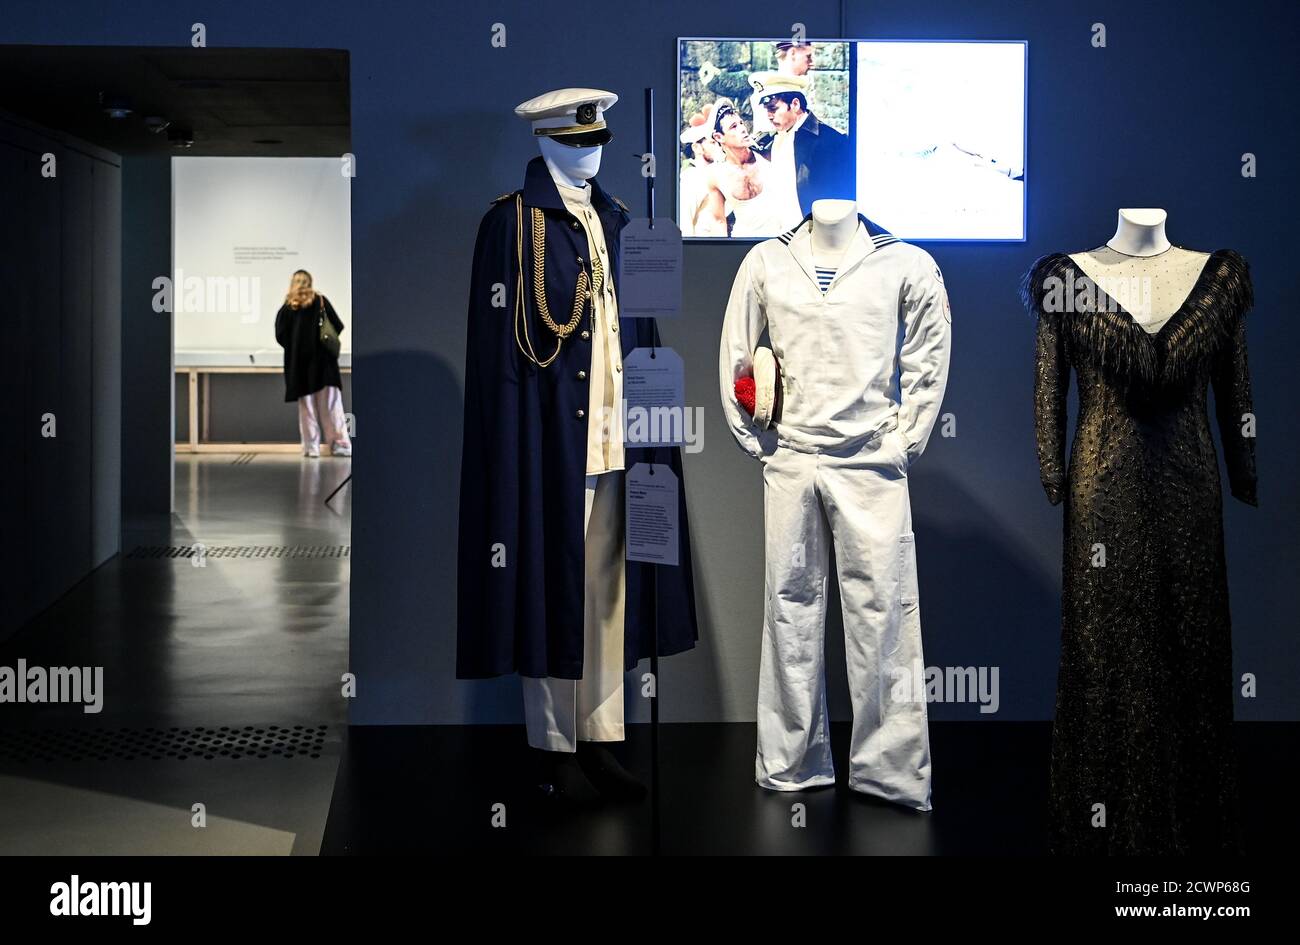 30 September 2020, Berlin: Costumes from the film Querelle by Rainer Werner  Fassbinder are shown in the exhibition "Hautnah. The Film Costumes of  Barbara Baum" at the Deutsche Kinemathek - Museum für